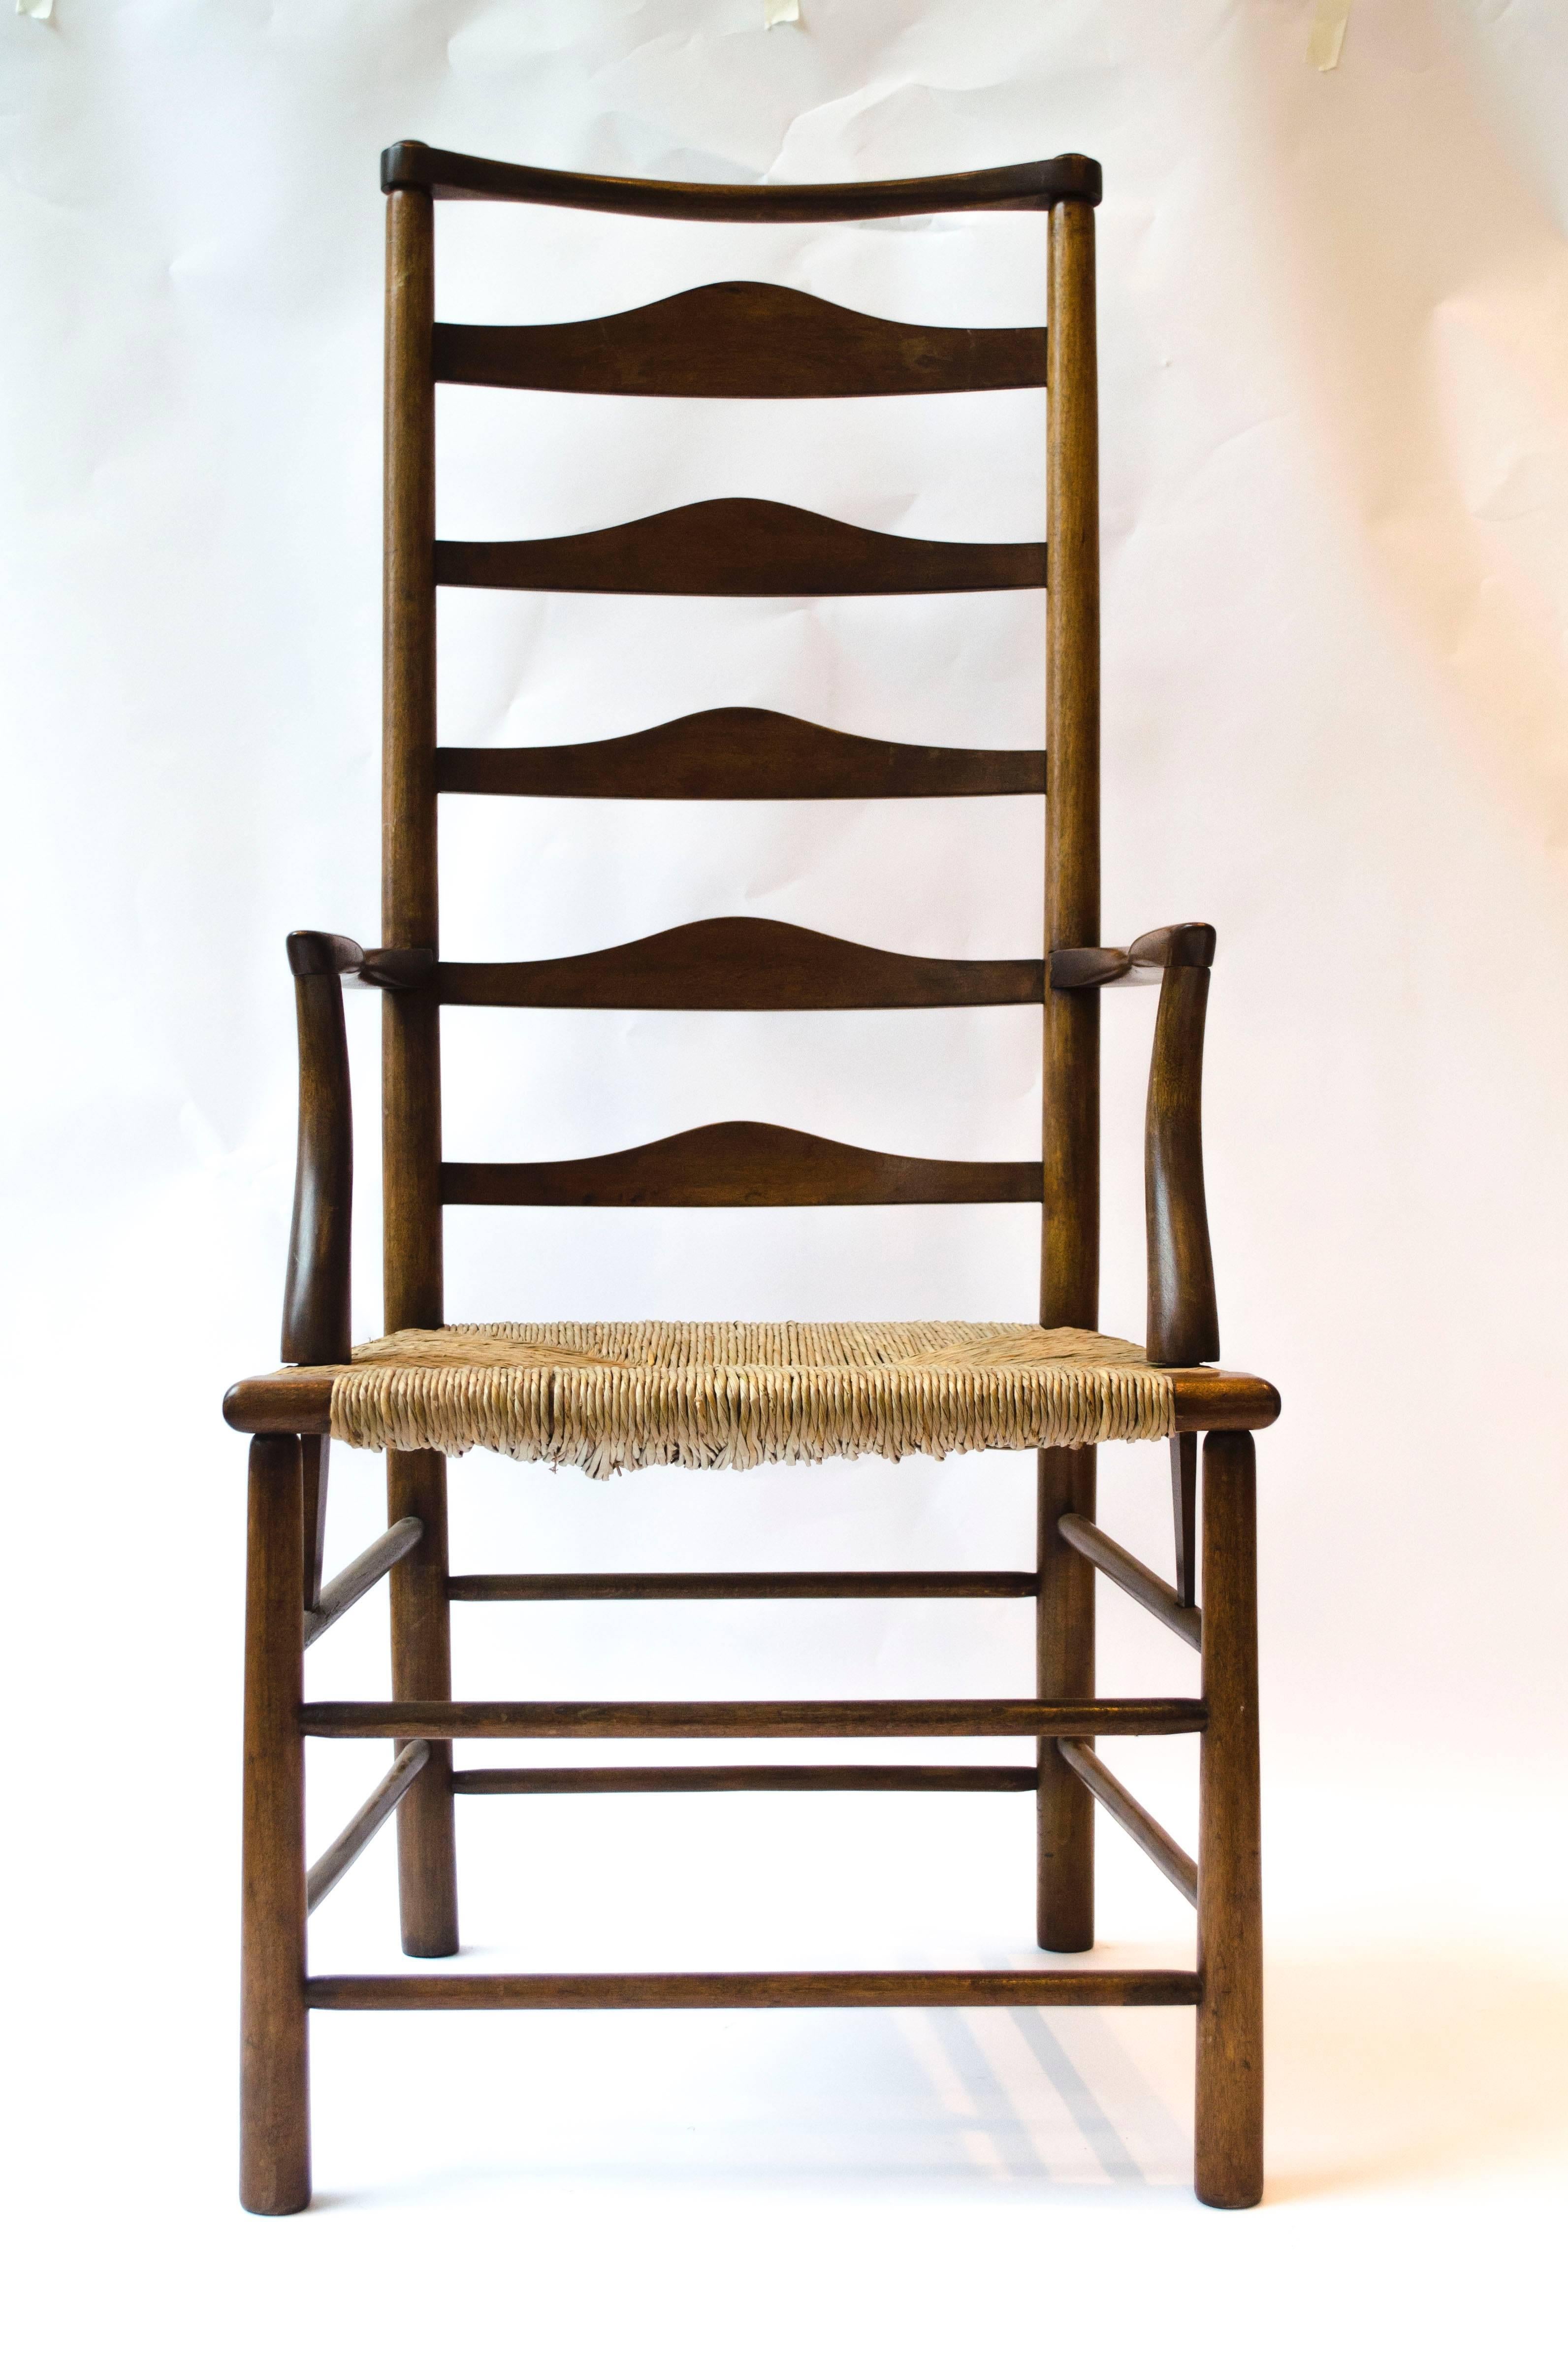 Charles Robert Ashbee (1863-1942) made by the guild of handicraft.
A stained beech high back ladder back armchair and a single matching side chair. 
Designed for the dining room of the 'Magpie and Stump', Cheyne Walk, Chelsea, his family home from